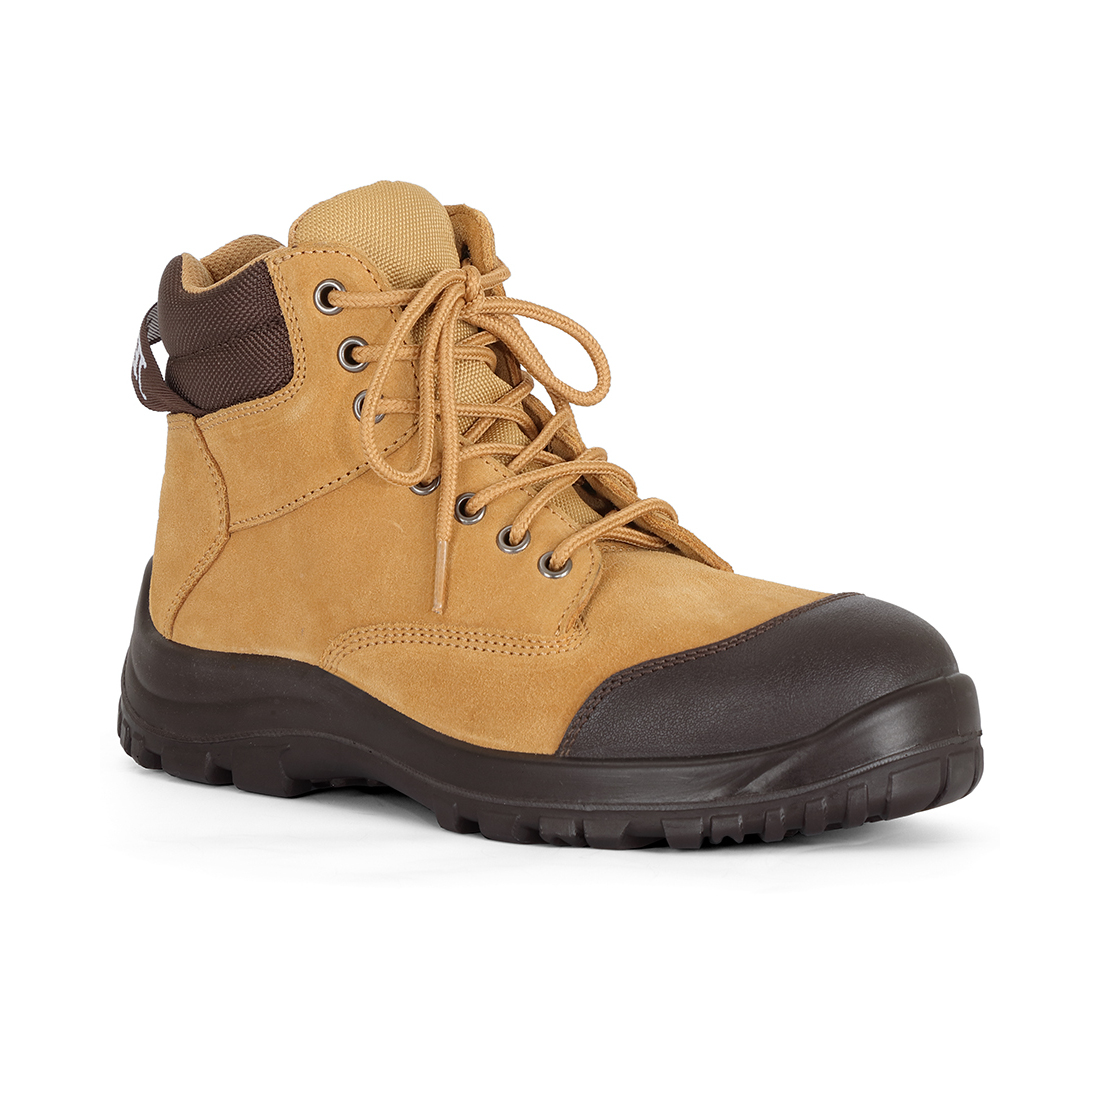 JB'S Steeler Safety Boots - 9F9 - Federal Workwear